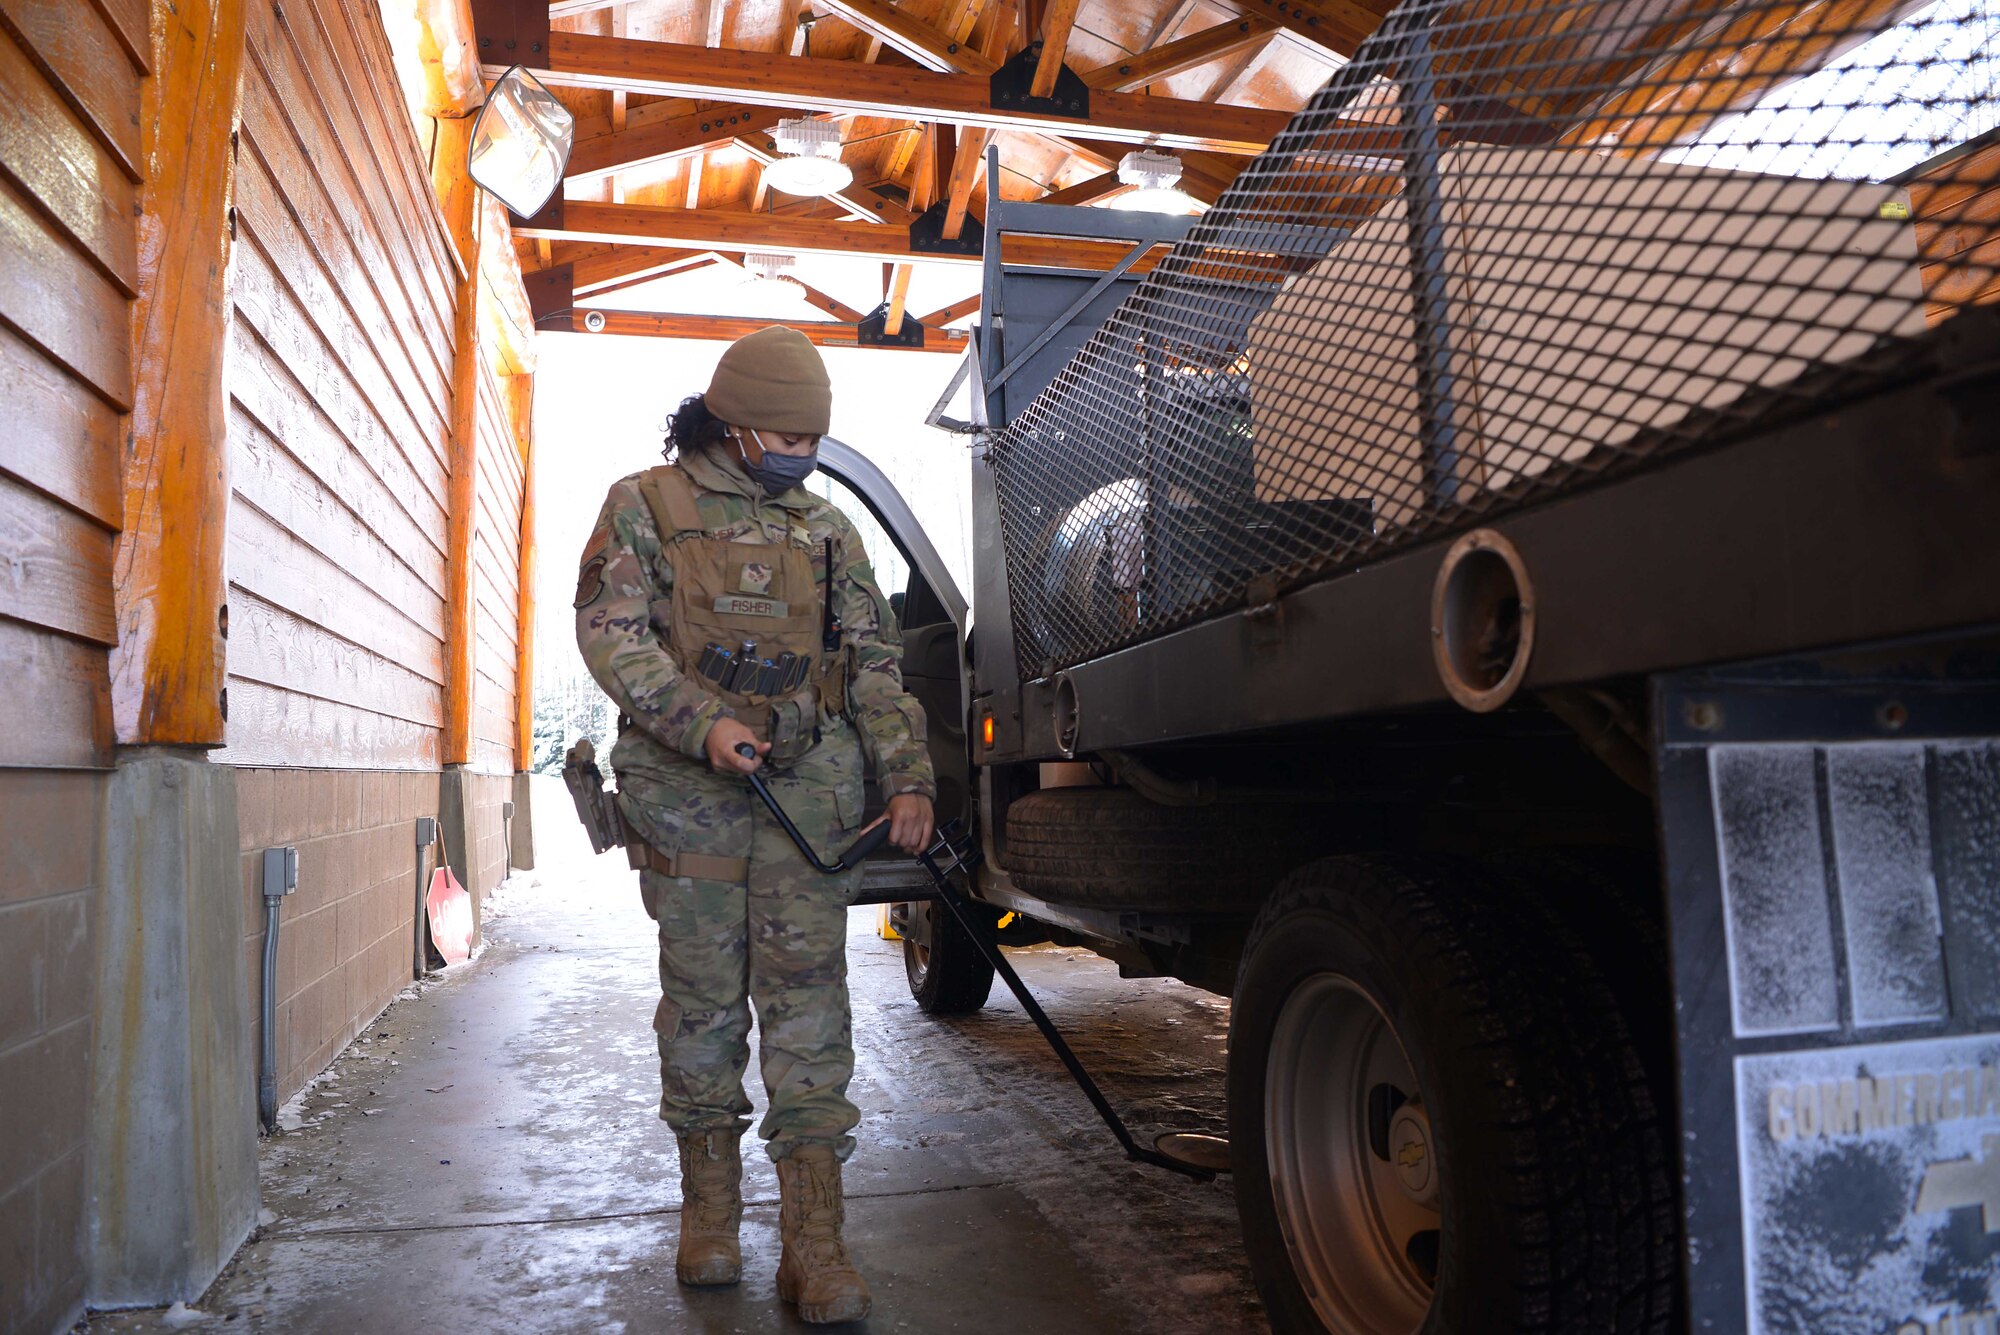 U.S. Air Force Senior Airman Heaven Fisher, a 354th Security Forces Squadron response force leader, searches a vehicle for explosives and contraband March 16, 2021, on Eielson Air Force Base Alaska. Security Forces defenders are responsible for protecting Air Force families and property 24/7 by providing law enforcement and security services. (U.S. Air Force photo by Senior Airman Beaux Hebert)